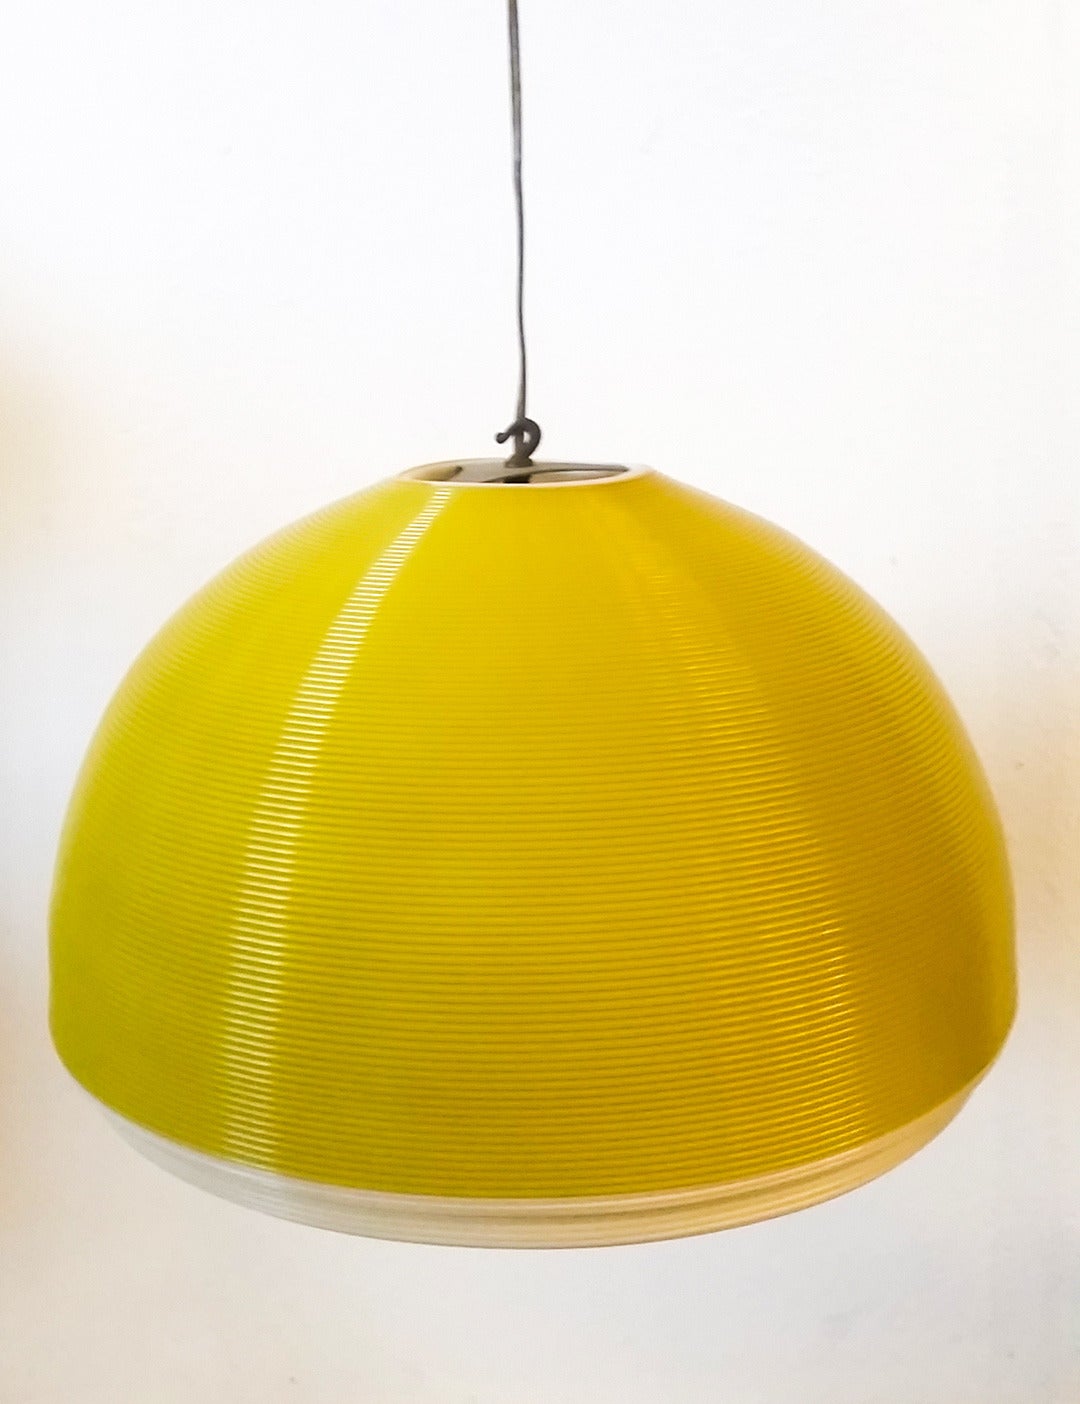 A 1950's mid century modern hanging Rotoflex pendant light with honeycomb diffusers by Heifetz. This mid century modern hanging chandelier pendant light is not only bright yellow and modern, it's clean enough that without knowing, one might think